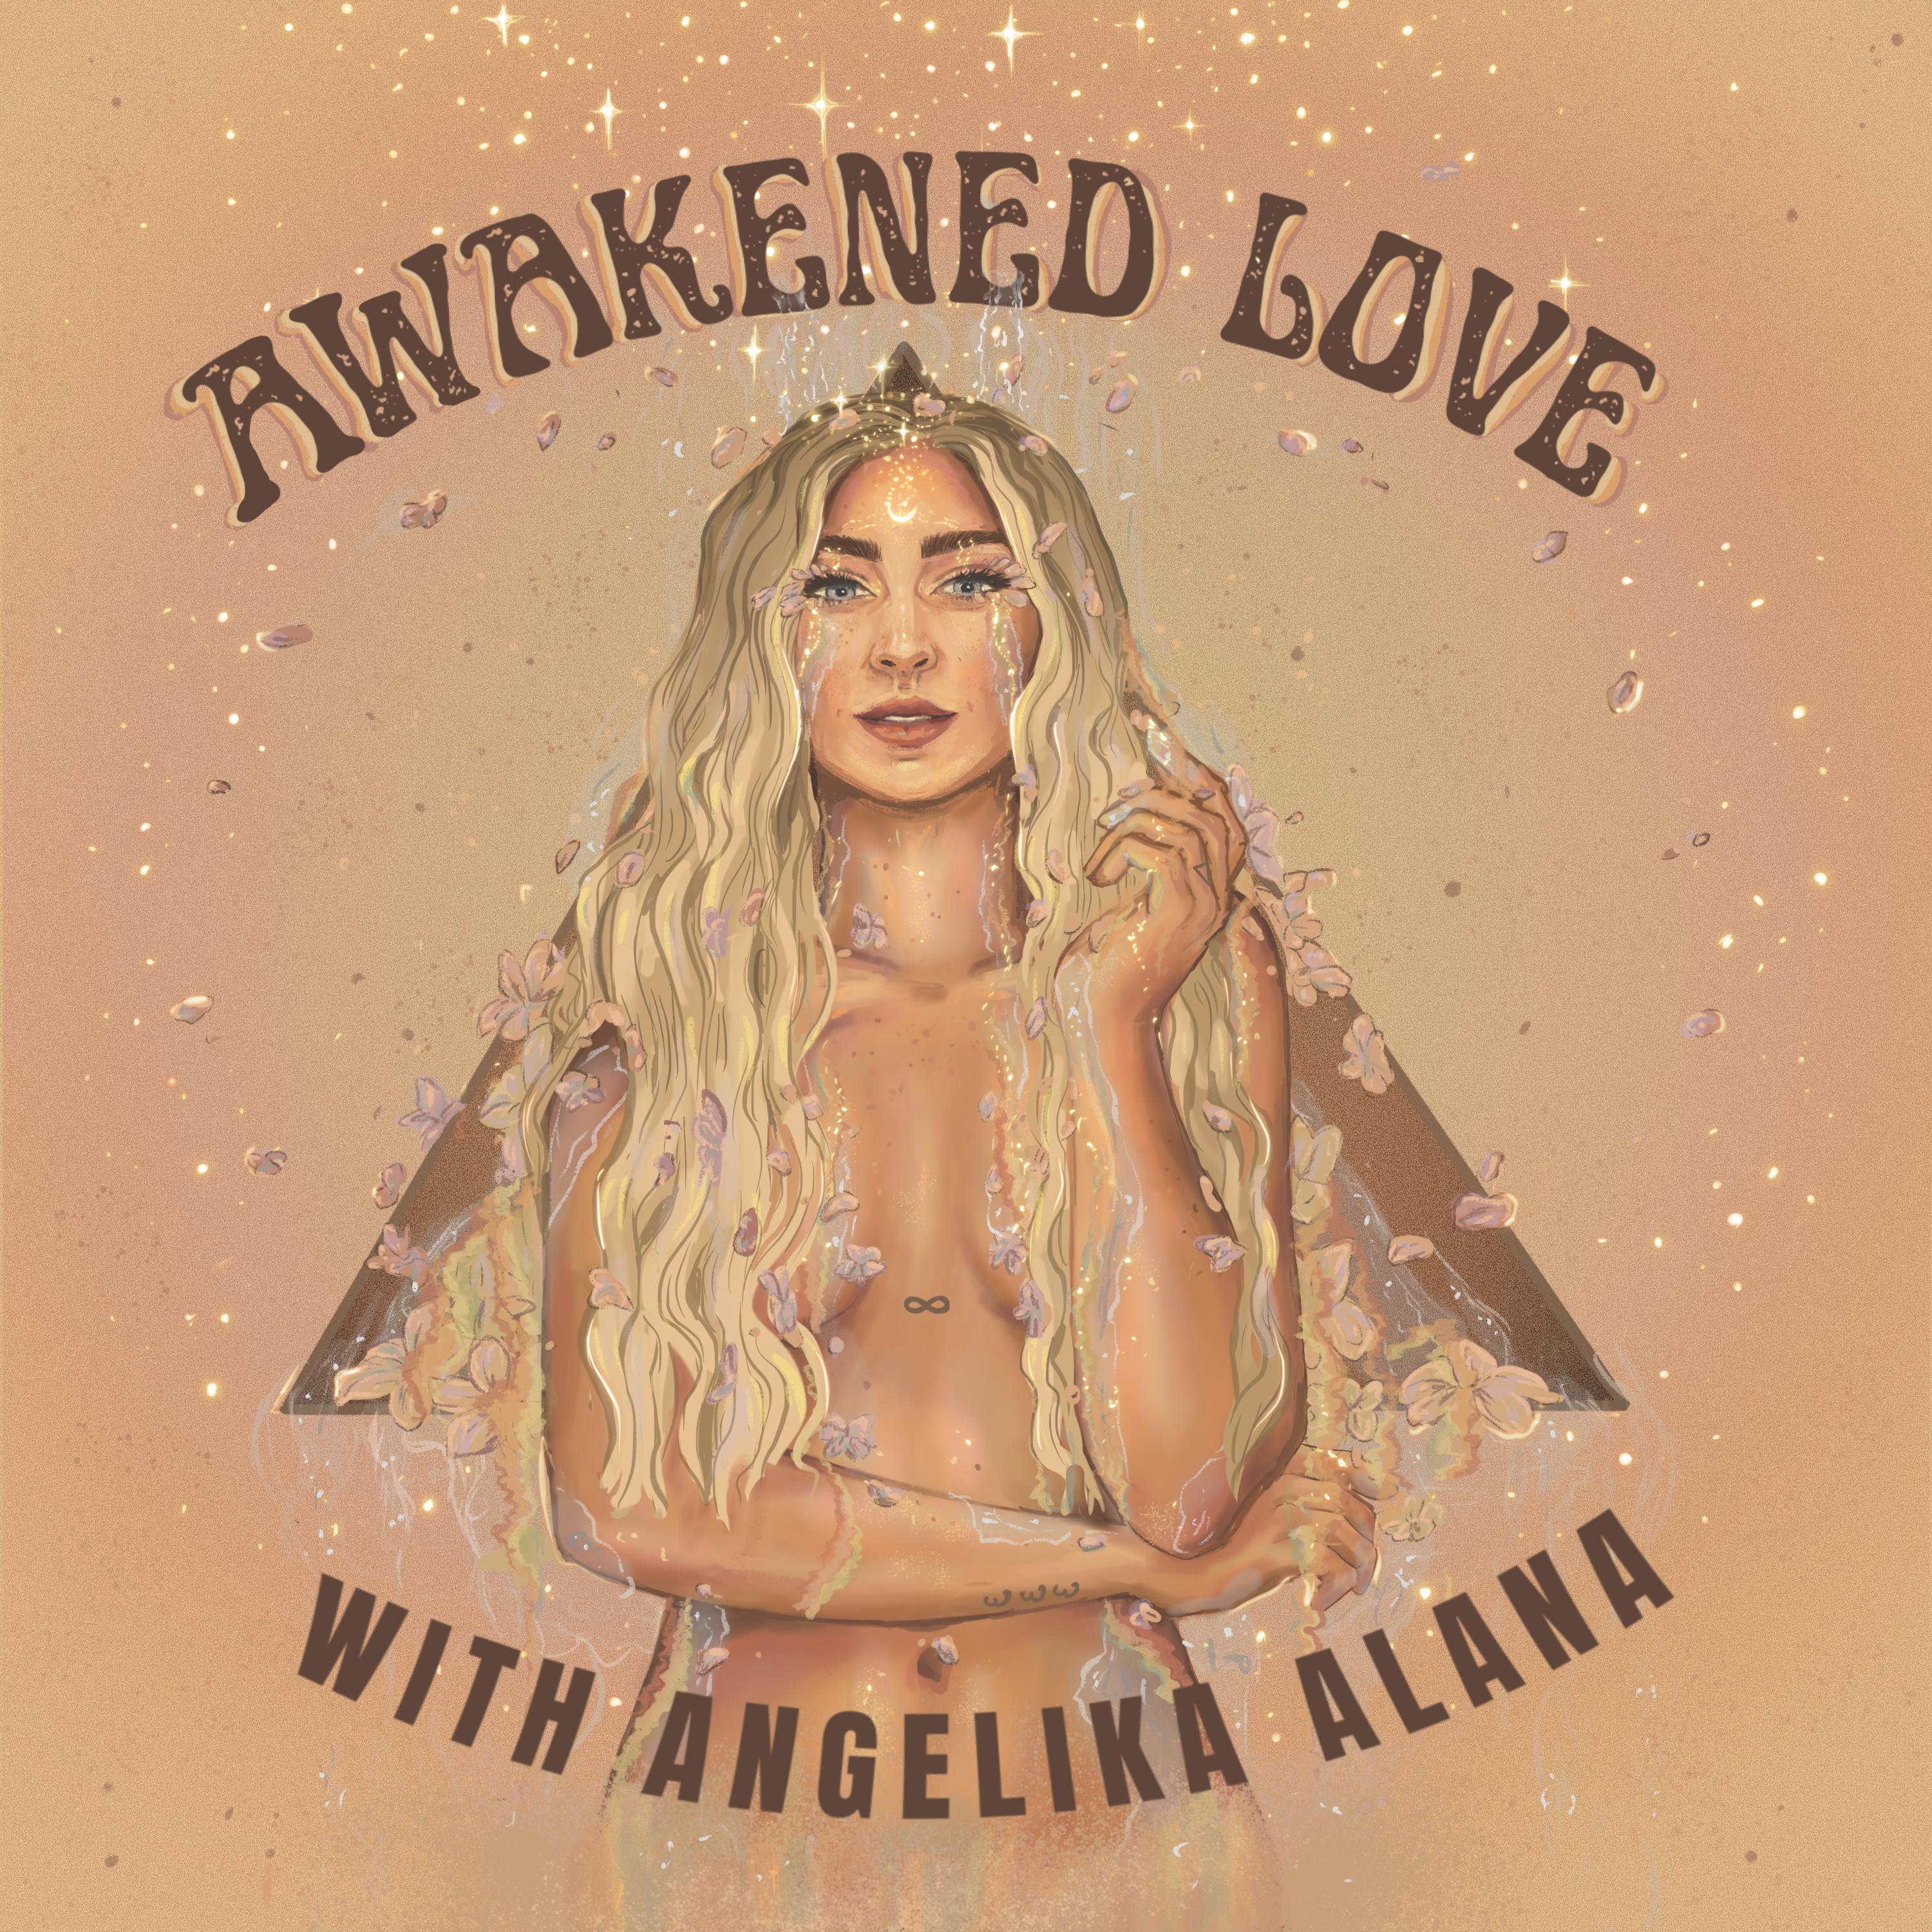 Midwives: The Original Witches - Home Births with Lindsey Meehleis | Awakened Love S2 EP34